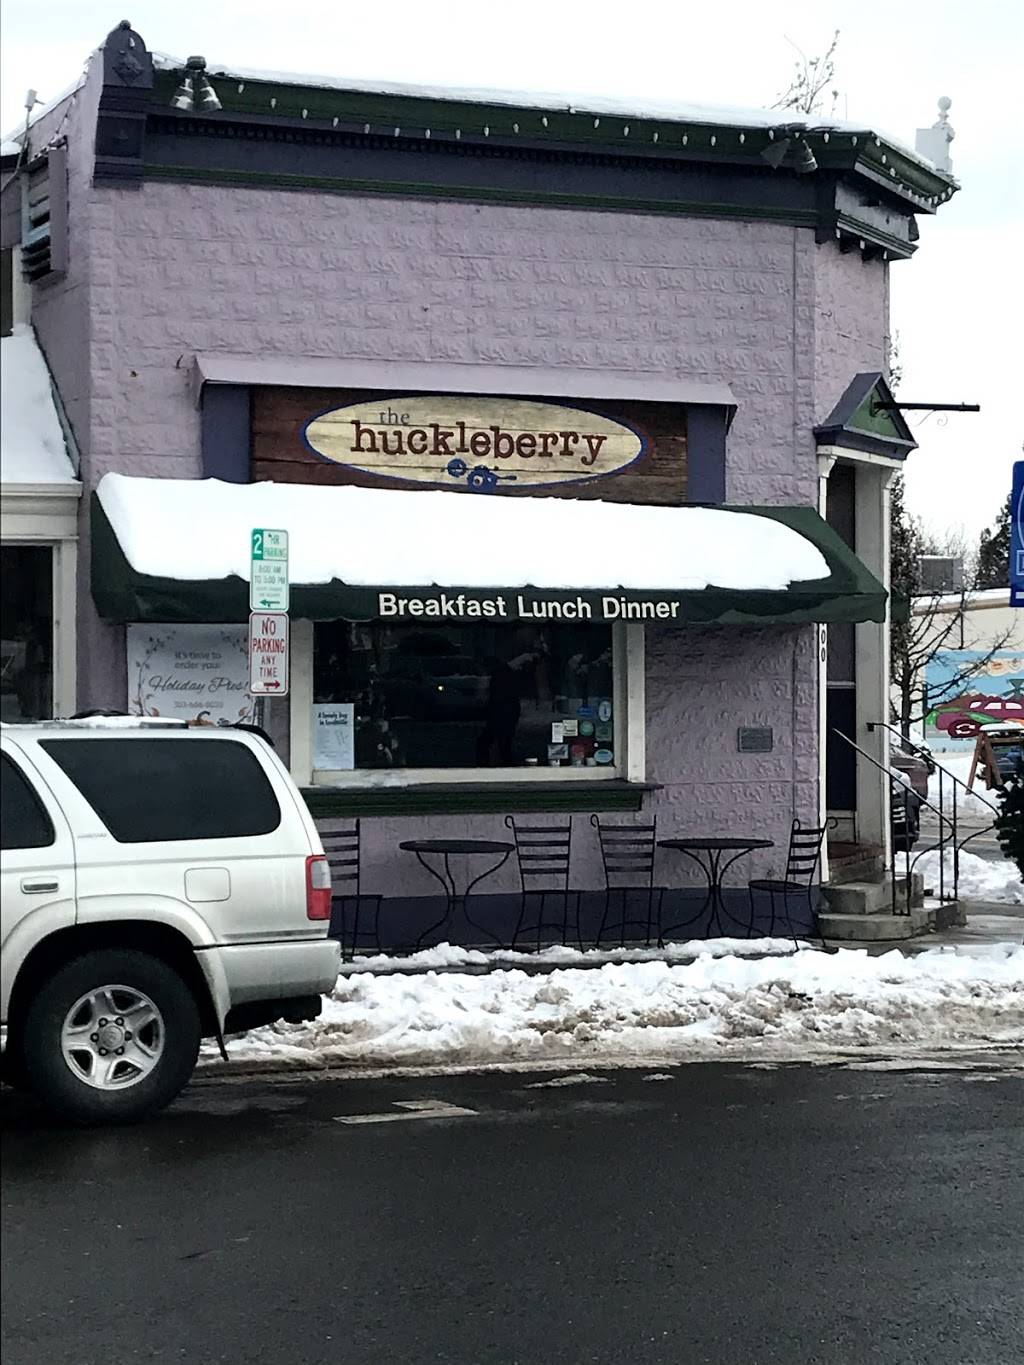 The Huckleberry | bakery | 700 Main St, Louisville, CO 80027, USA | 3036668020 OR +1 303-666-8020